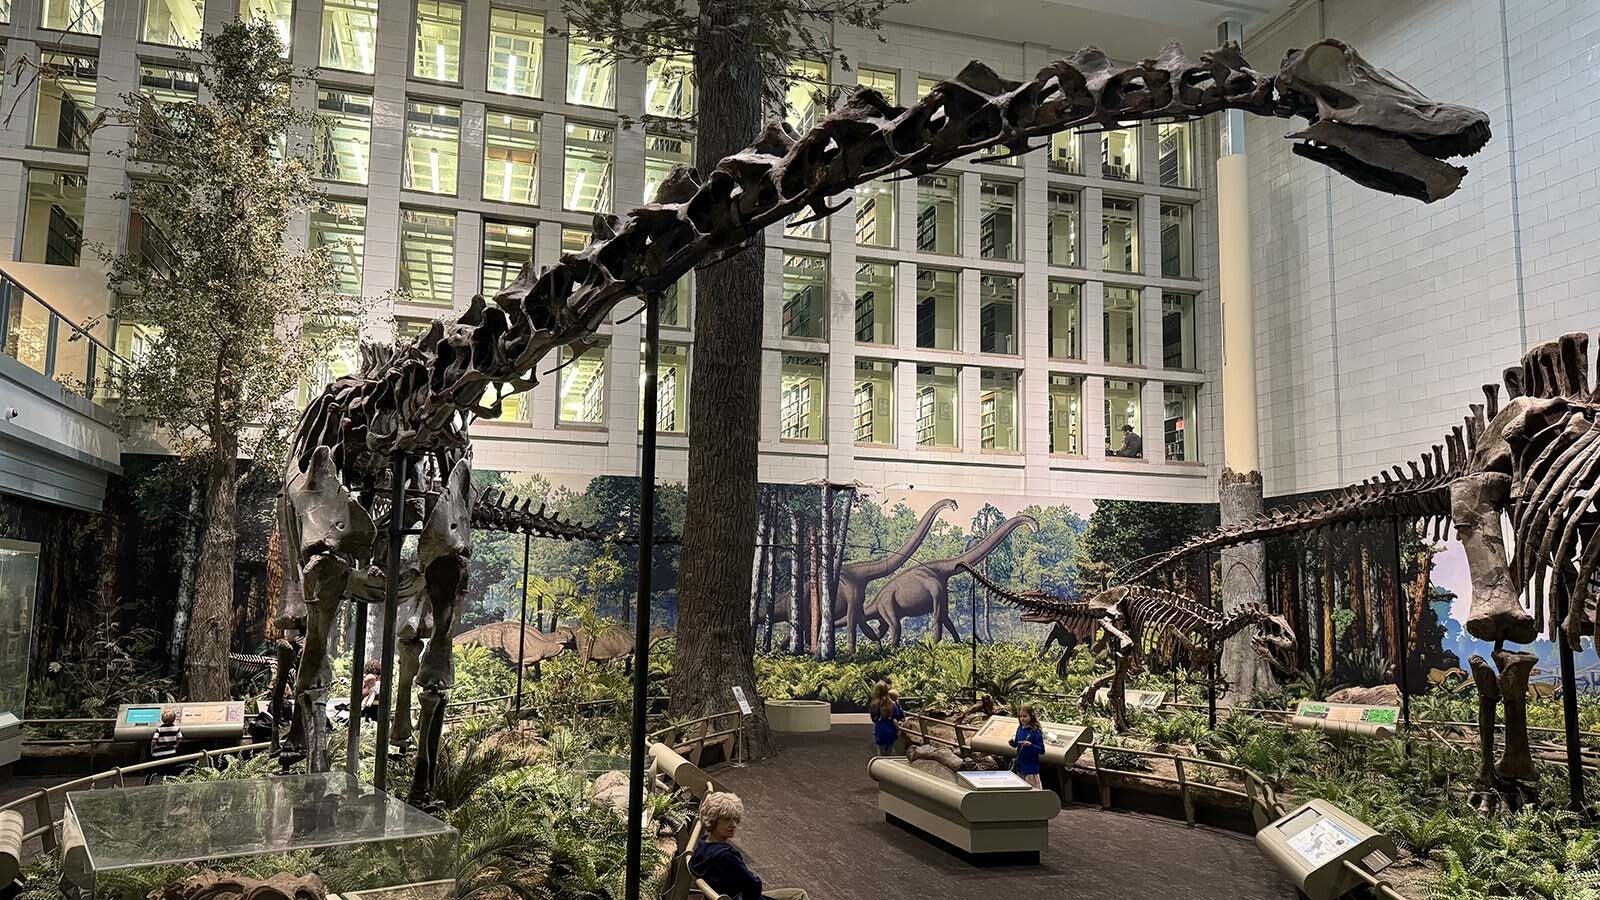 The mounted skeleton of Diplodocus carnegii, "the Star-Spangled Dinosaur," in the Carnegie Museum of Natural History in Pittsburgh, Pennsylvania. This 87-foot-long Jurassic giant from Albany County, Wyoming, was one of the first complete skeletons of a large dinosaur ever found and mounted.